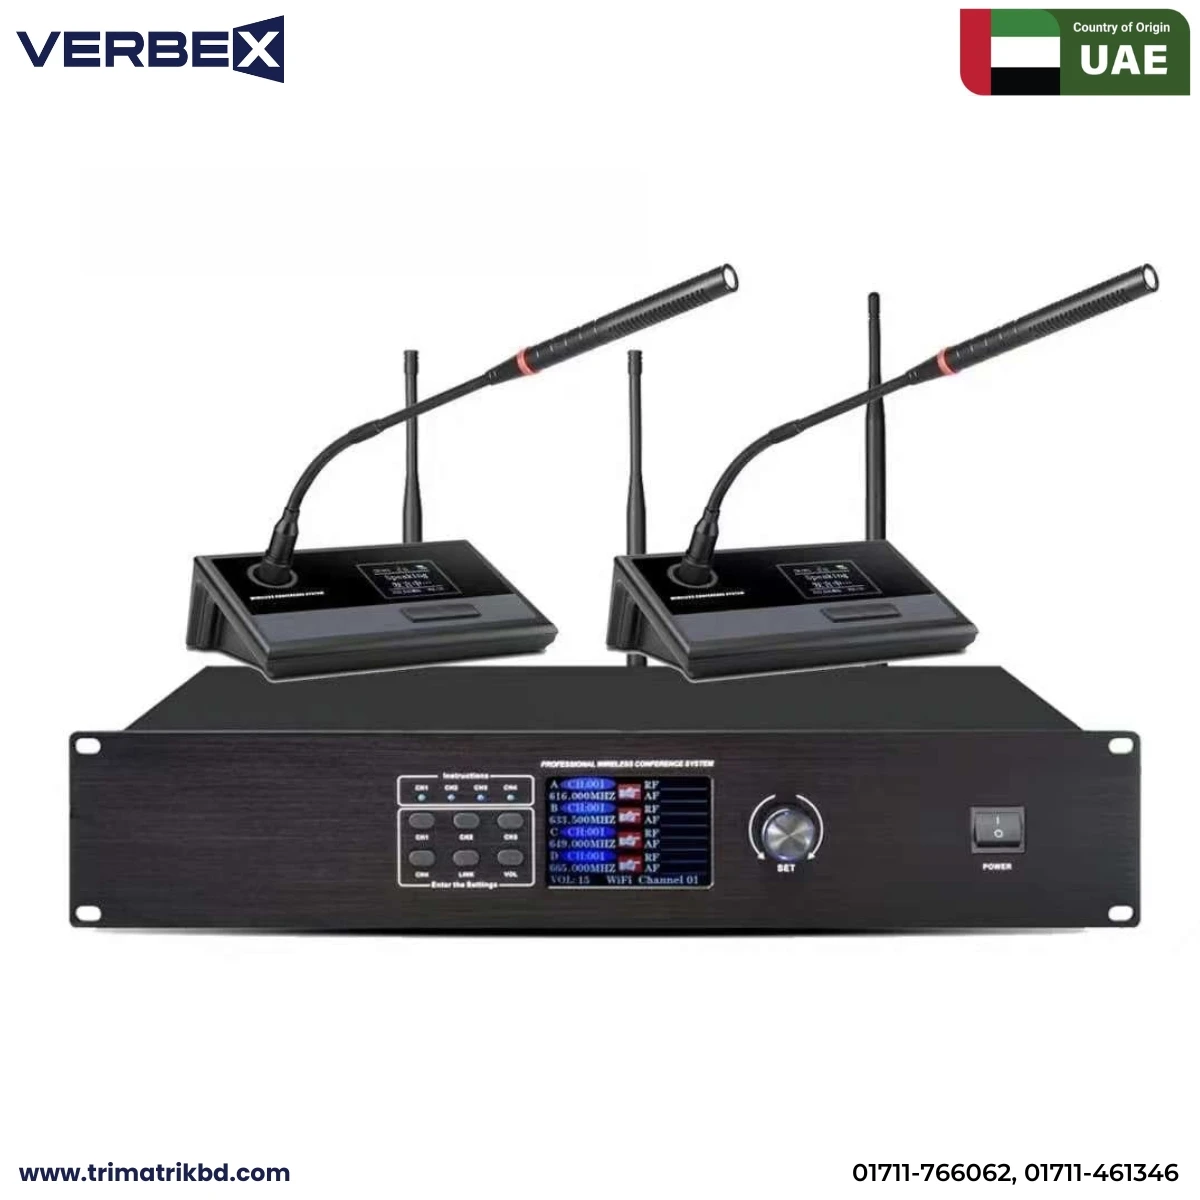 Verbex VT-6200M Wireless Conference System Central Unit